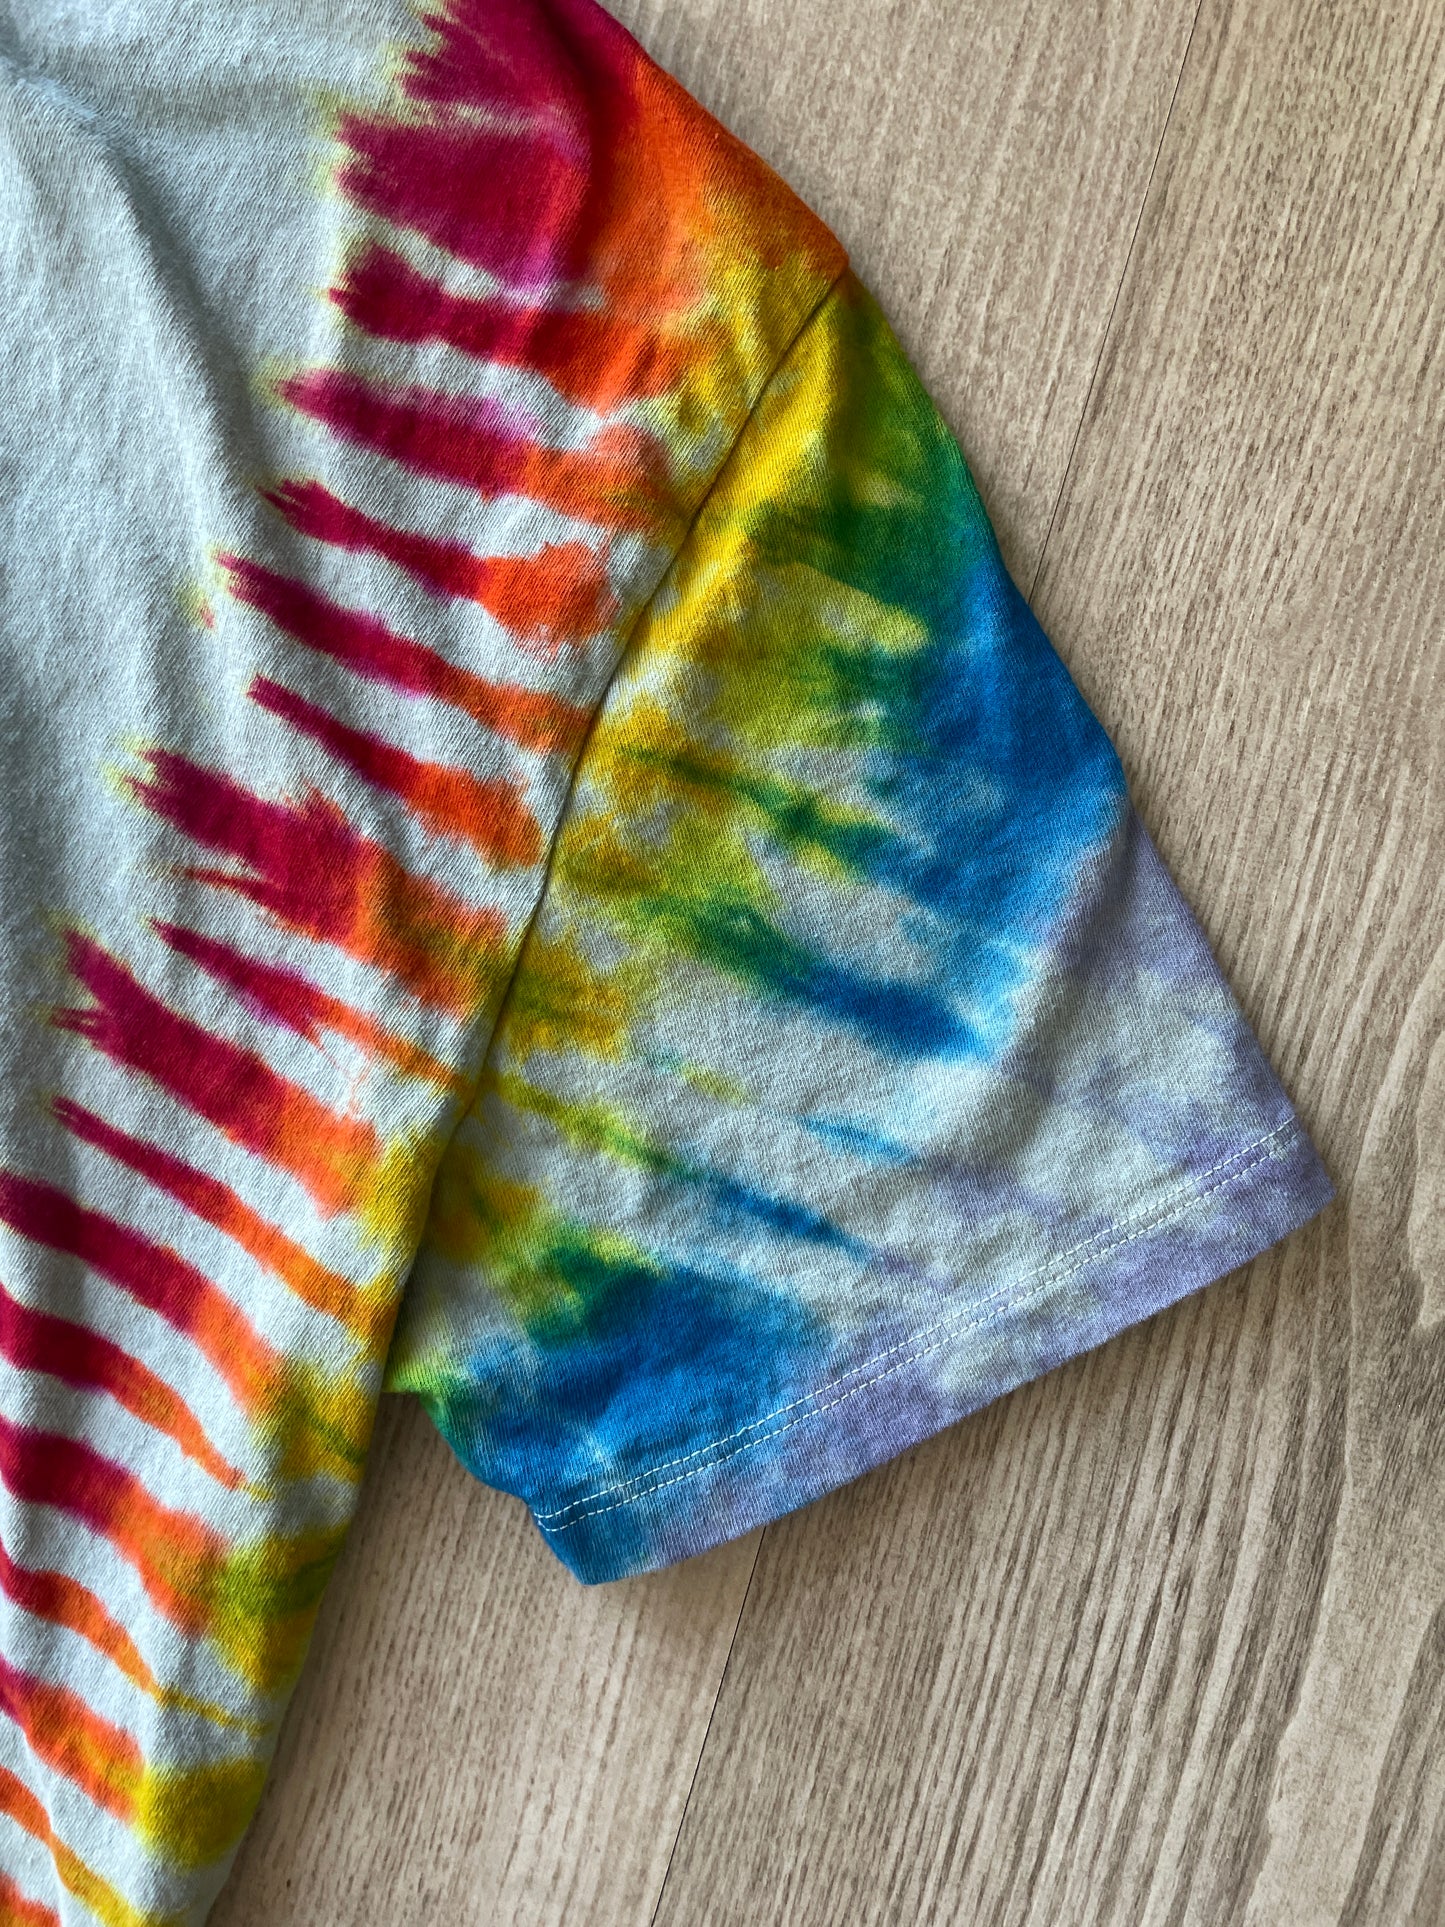 LARGE Men’s Run DMC Speakers Tie Dye Short Sleeve T-Shirt | One-Of-a-Kind Upcycled Rainbow Pleated Top